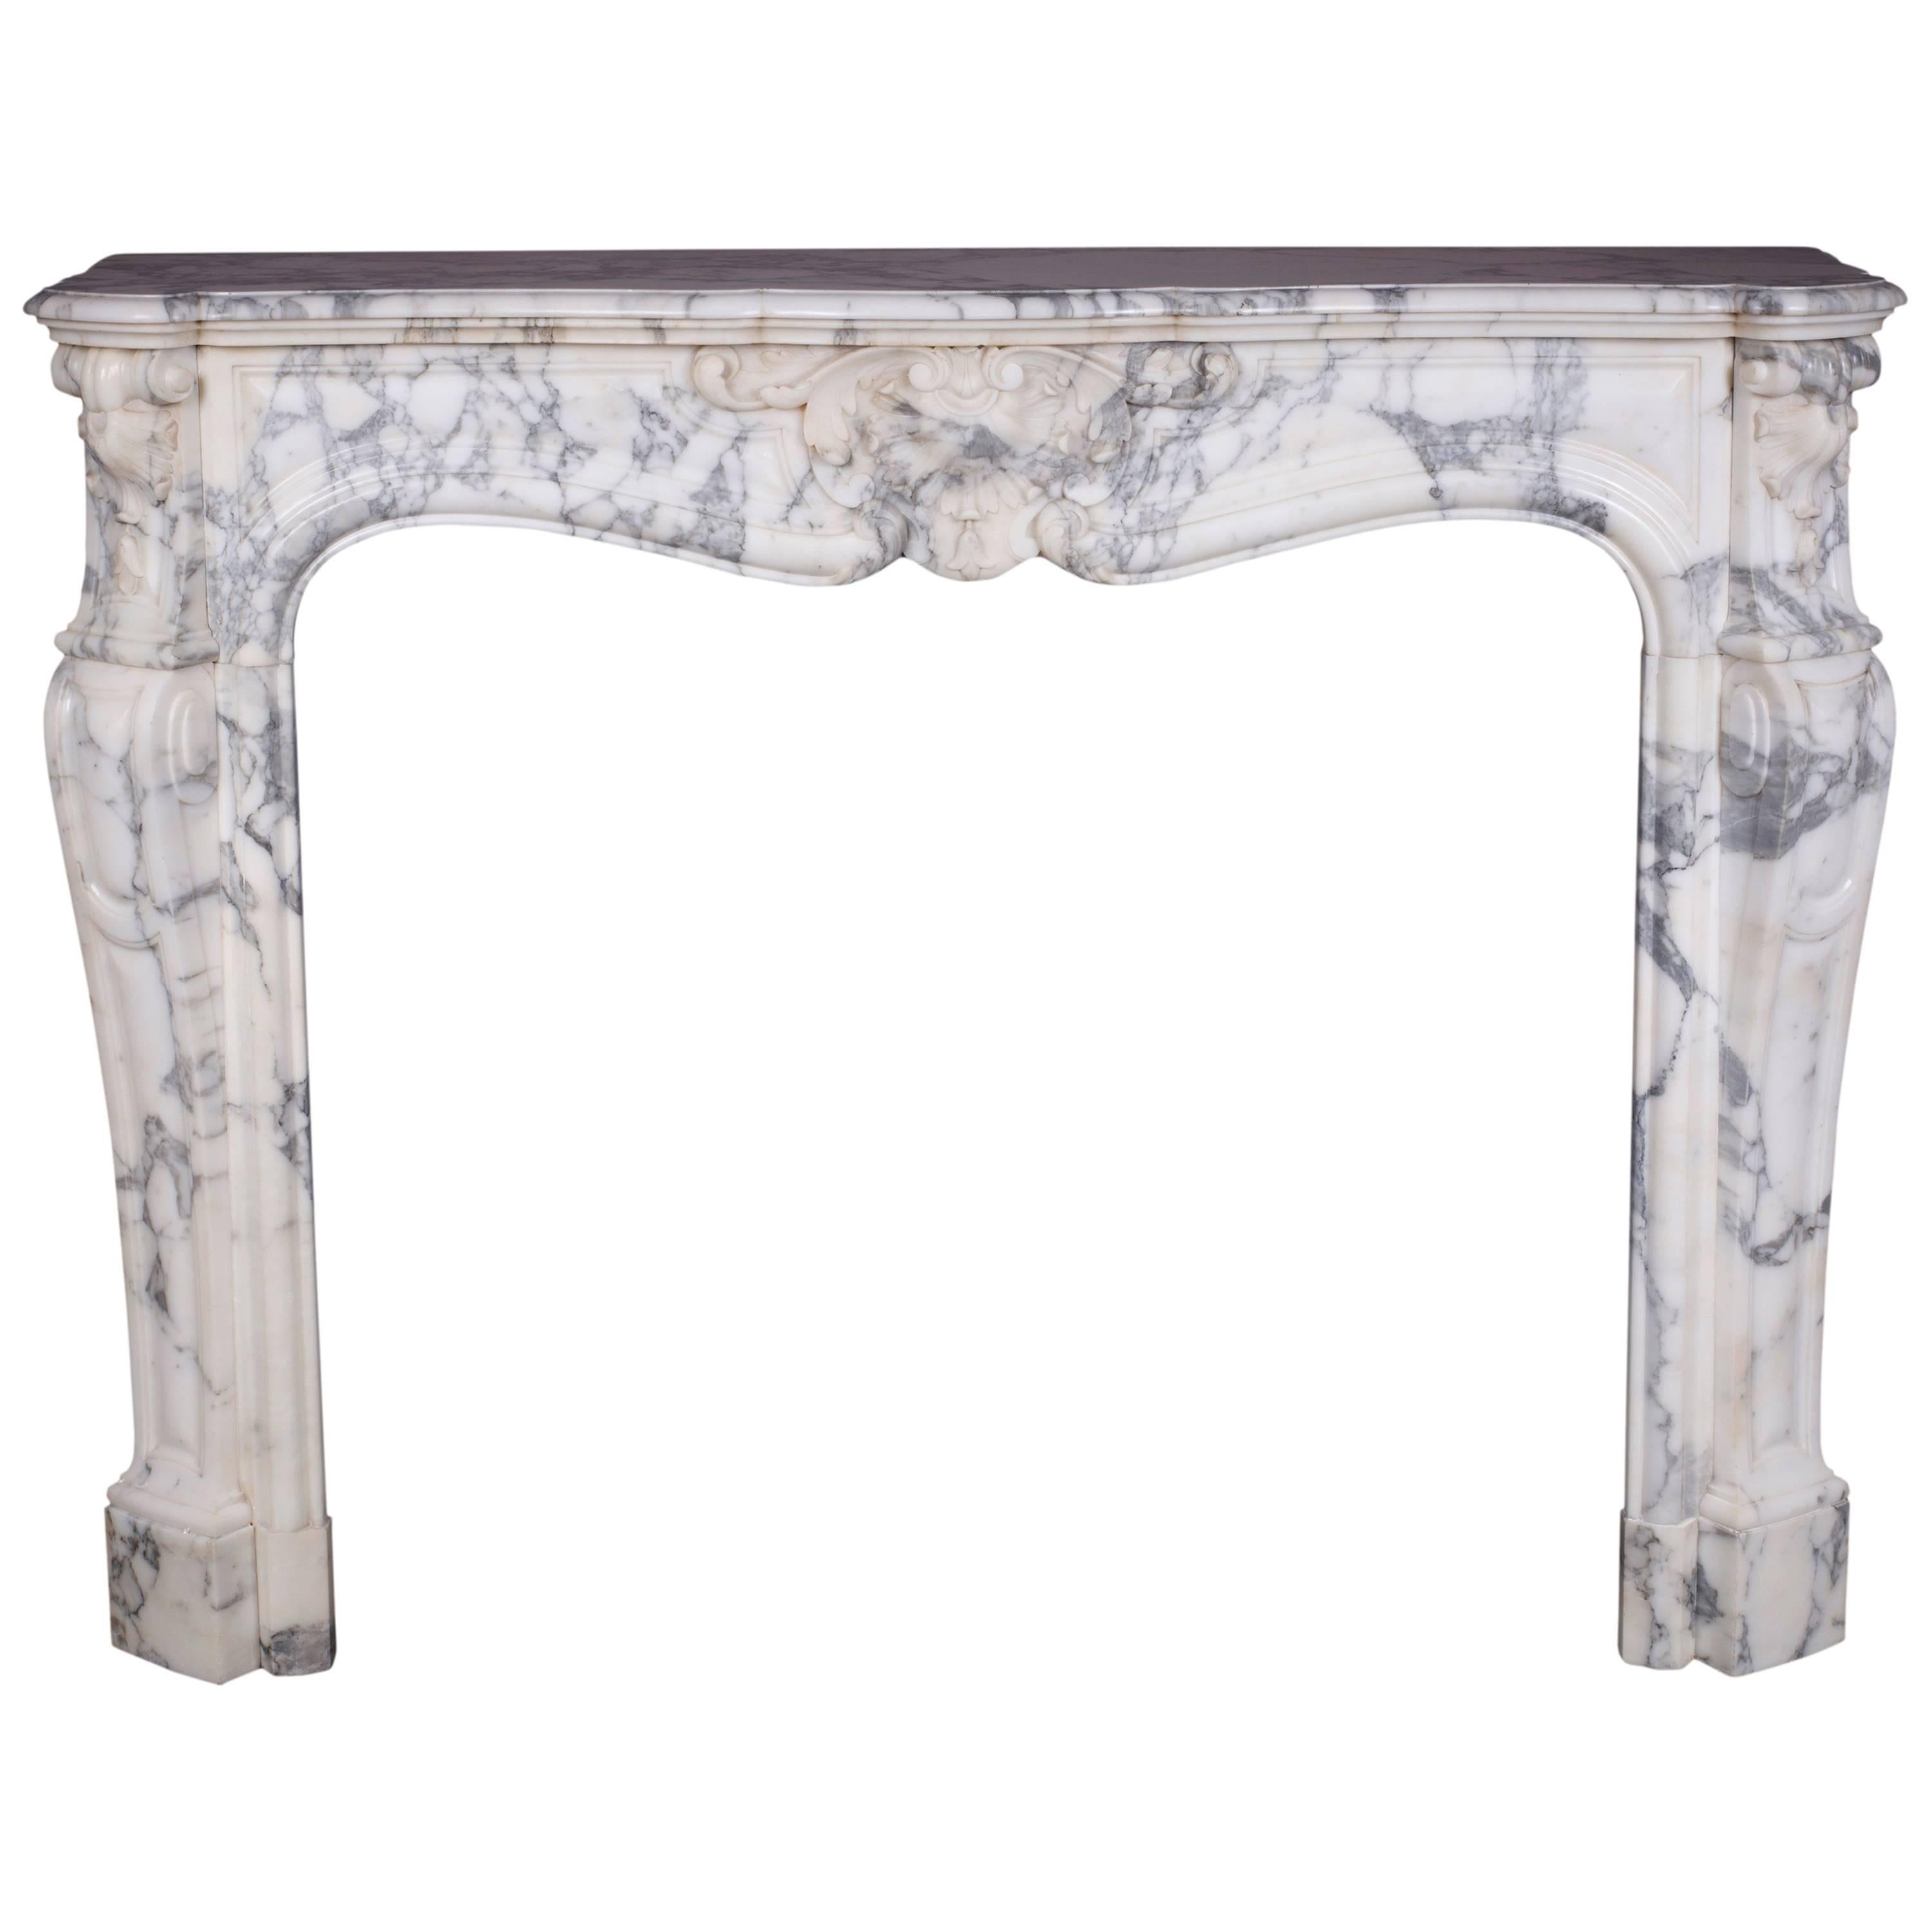 Antique Louis XV Style Fireplace with Three Shells in Arabescato Marble